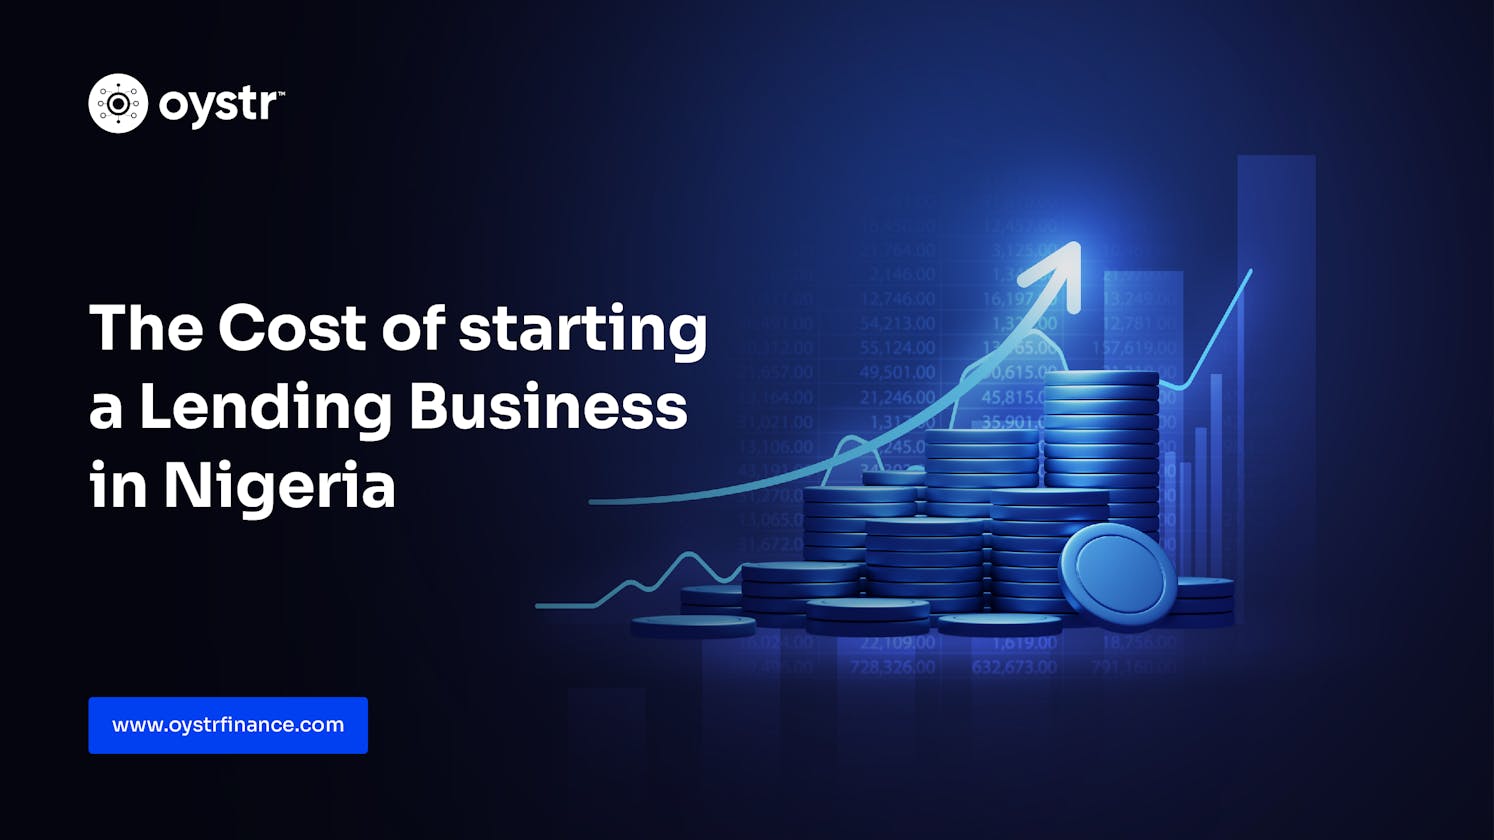 What is the cost of starting a lending business in Nigeria?